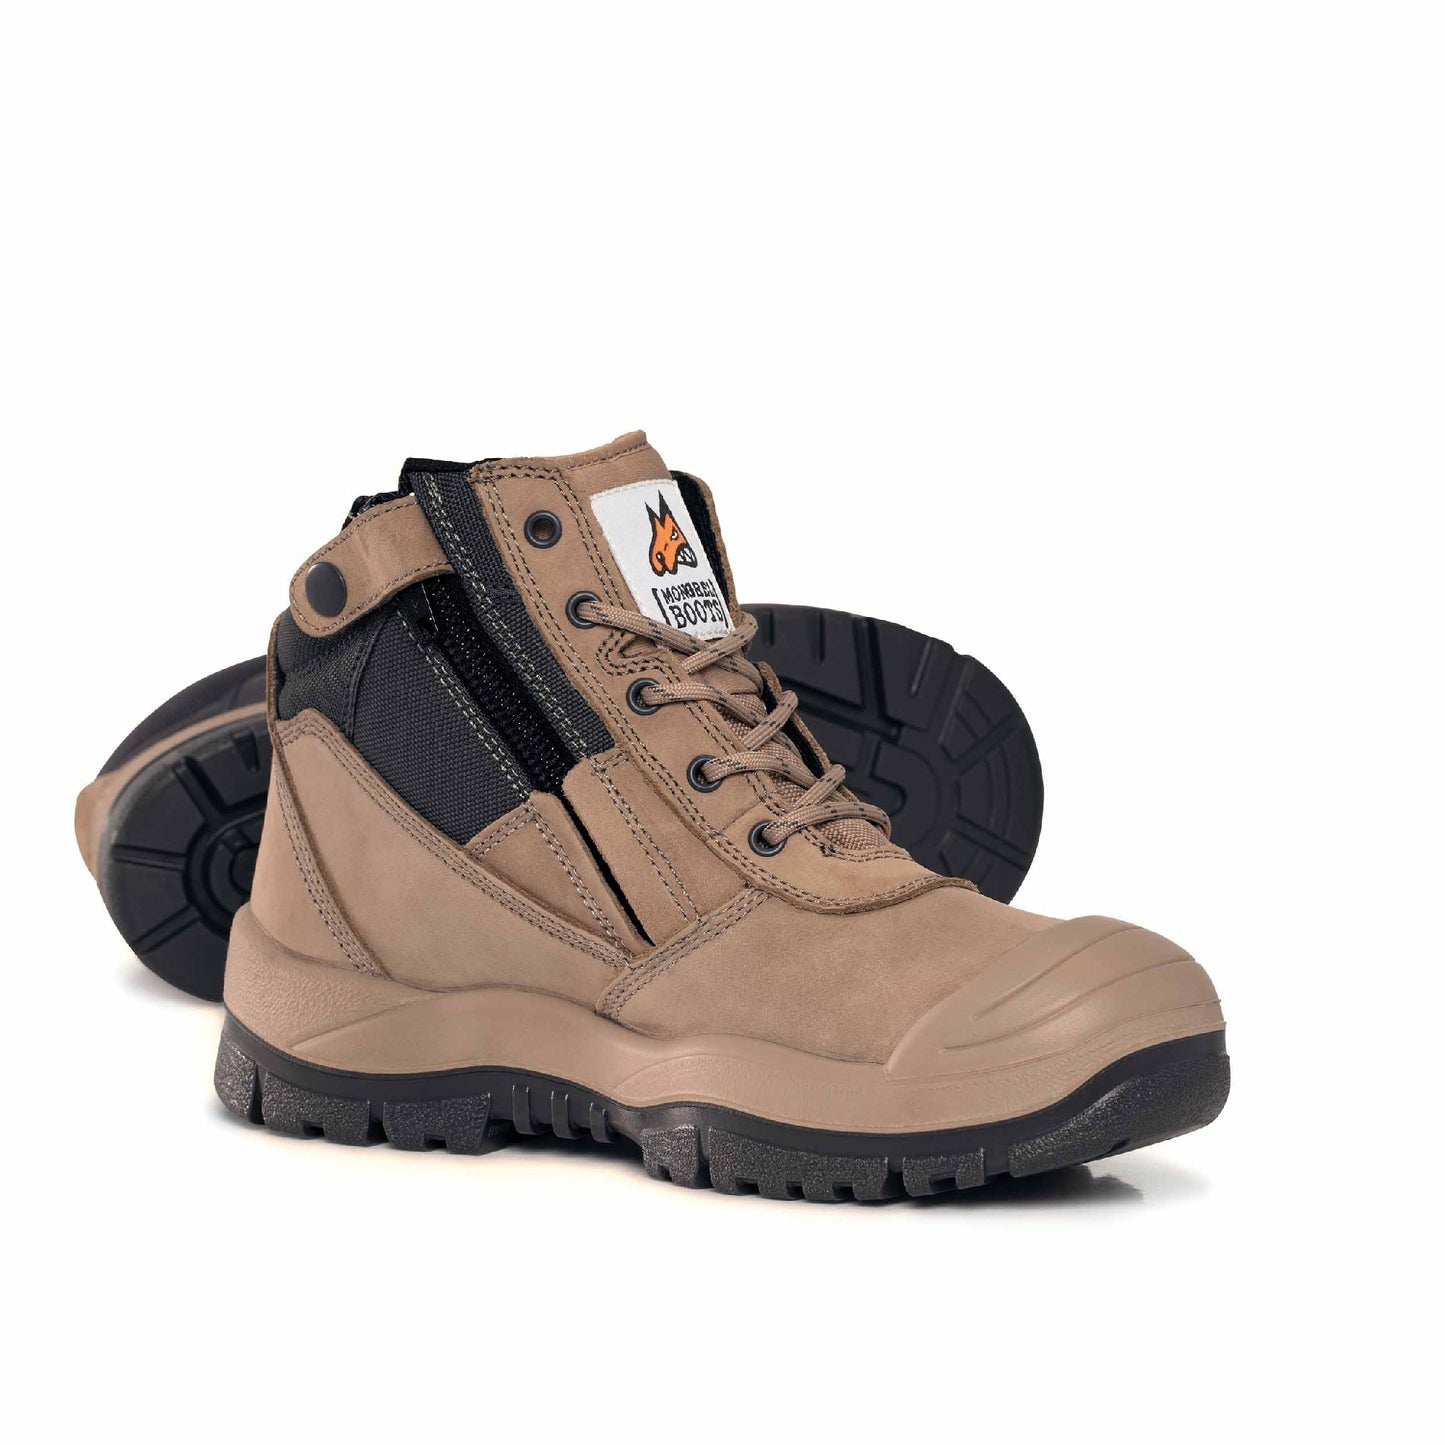 Mongrel Boots 461060 Stone Zip Sided Safety